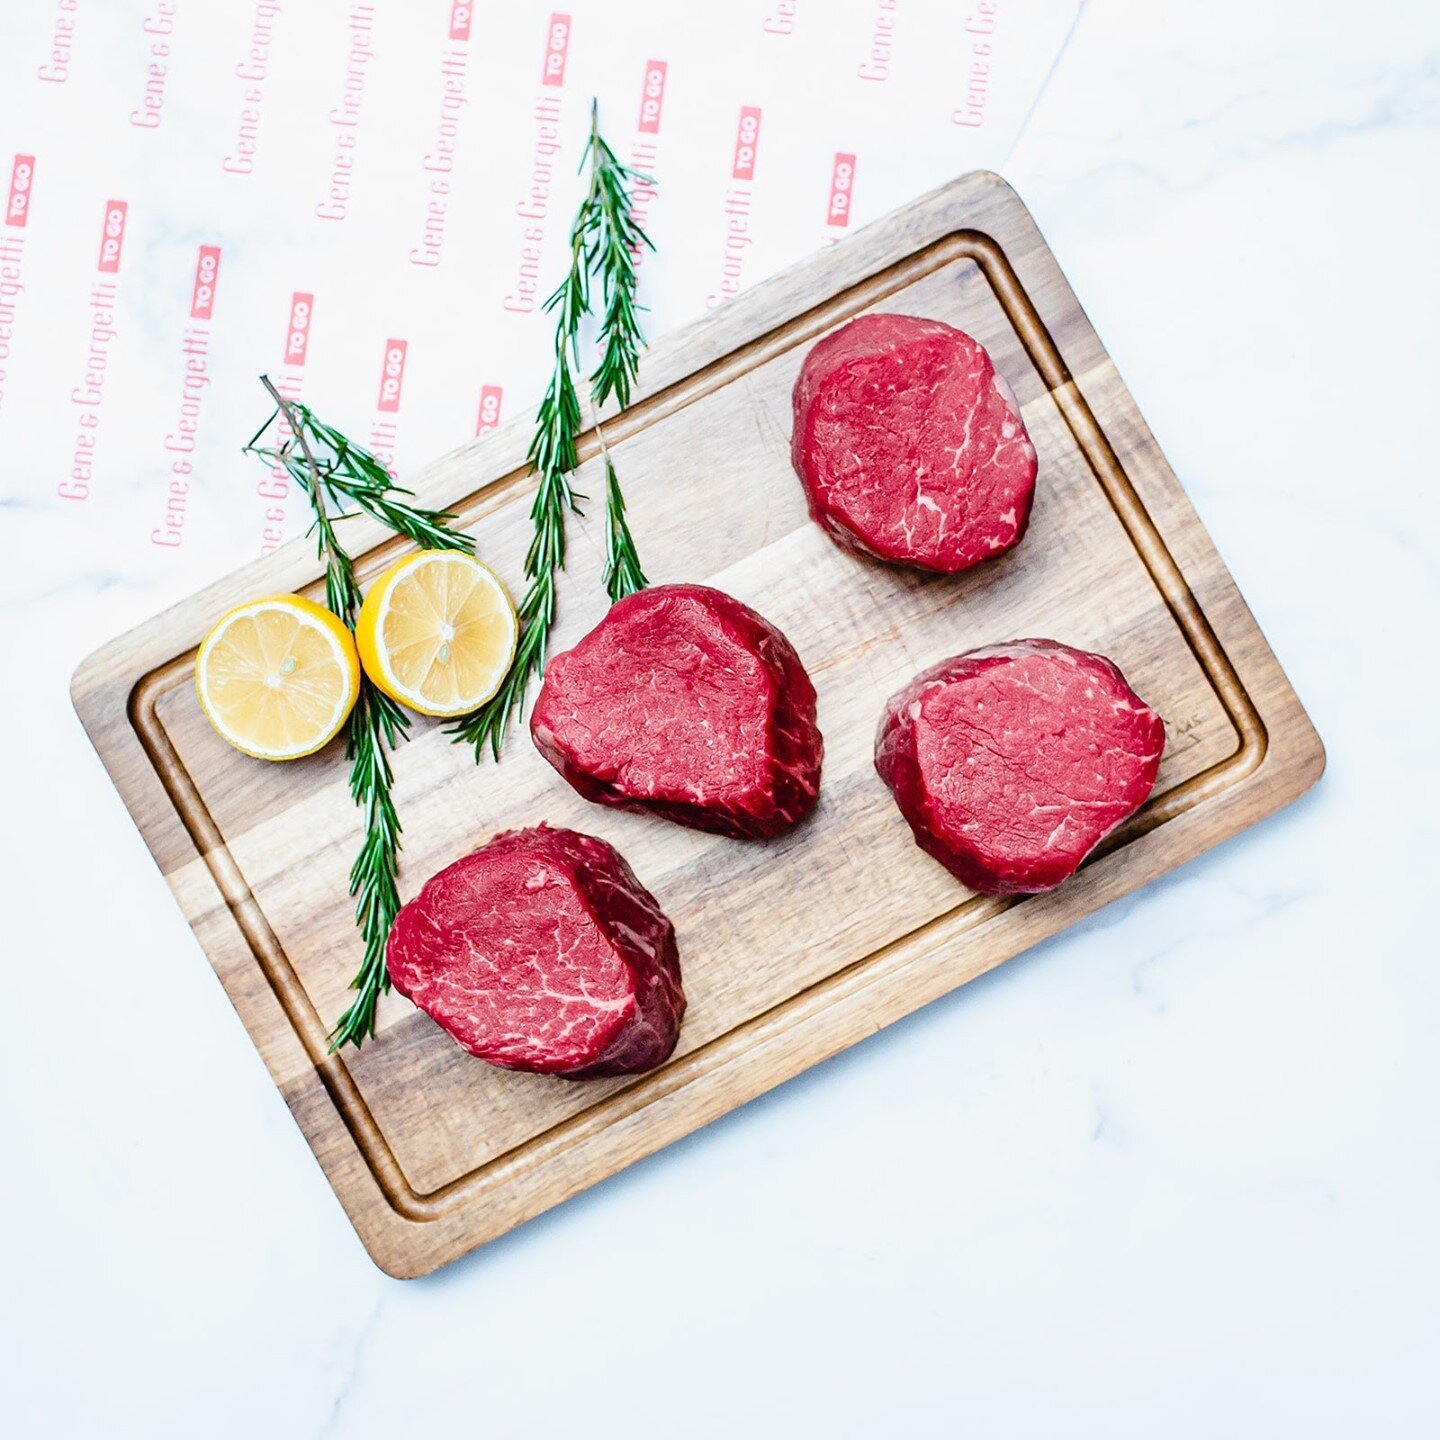 Make no mis-steak, you can get all the deliciousness of Gene and Georgetti delivered right to your doorstep. 

Whether you want a monthly fix, looking for a delicious gift or you want to treat yourself to the flavors of The Windy City, shop all your 